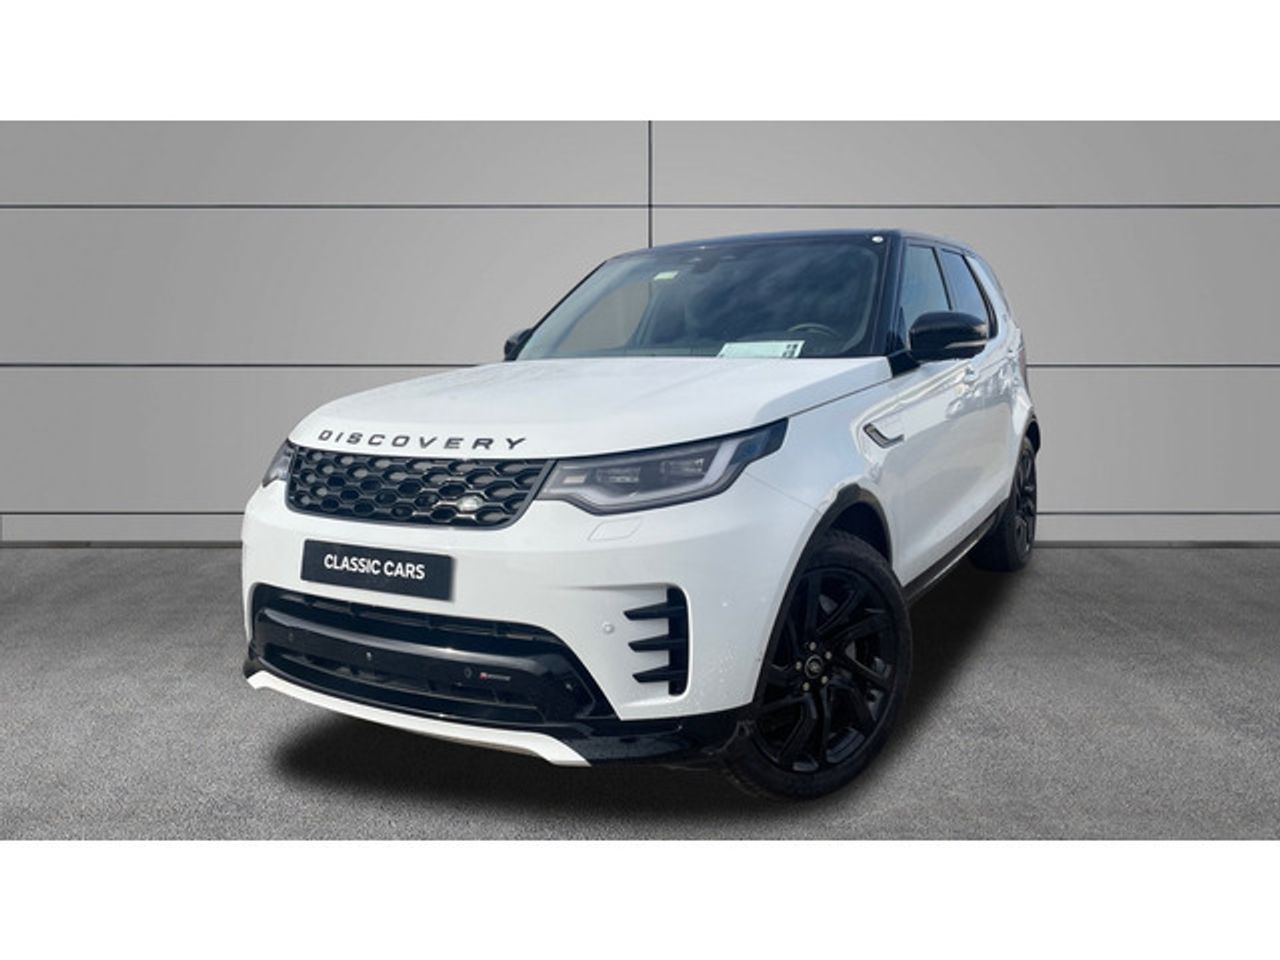 Land-rover discovery 3.0d i6 r-dynamic s awd auto 221 kw (300 cv)